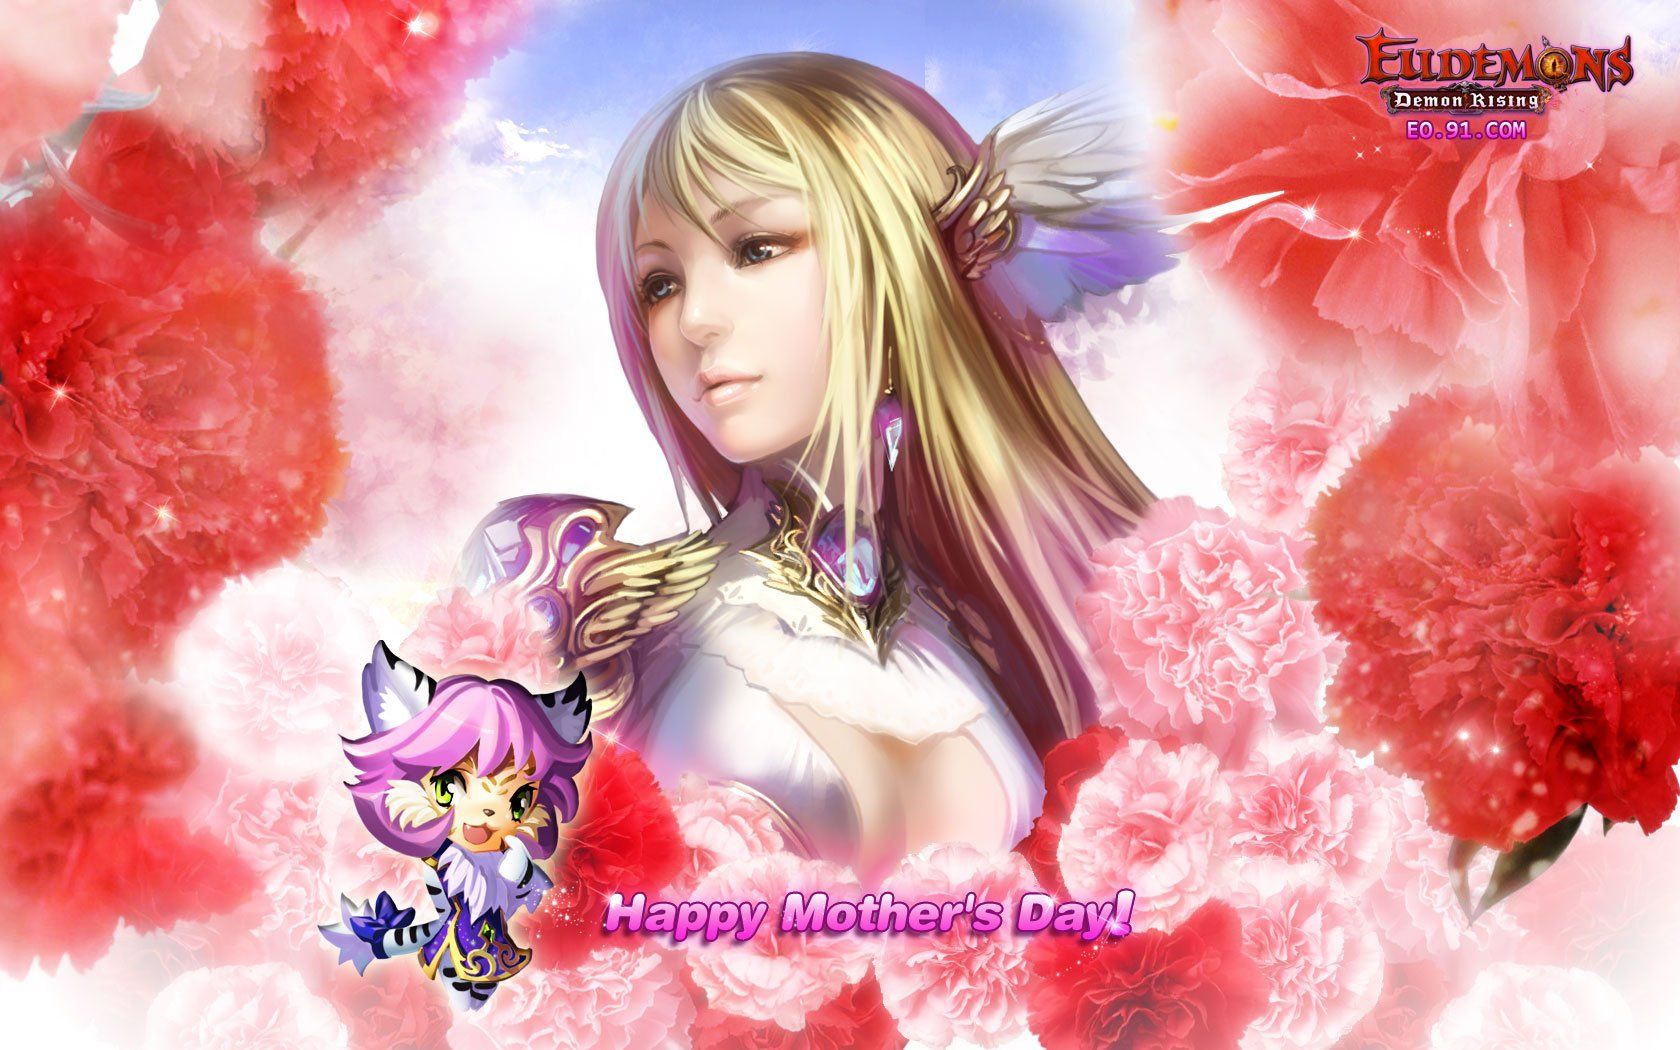 EUDEMONS ONLINE mmo rpg fantasy mothers day wallpaperx1050